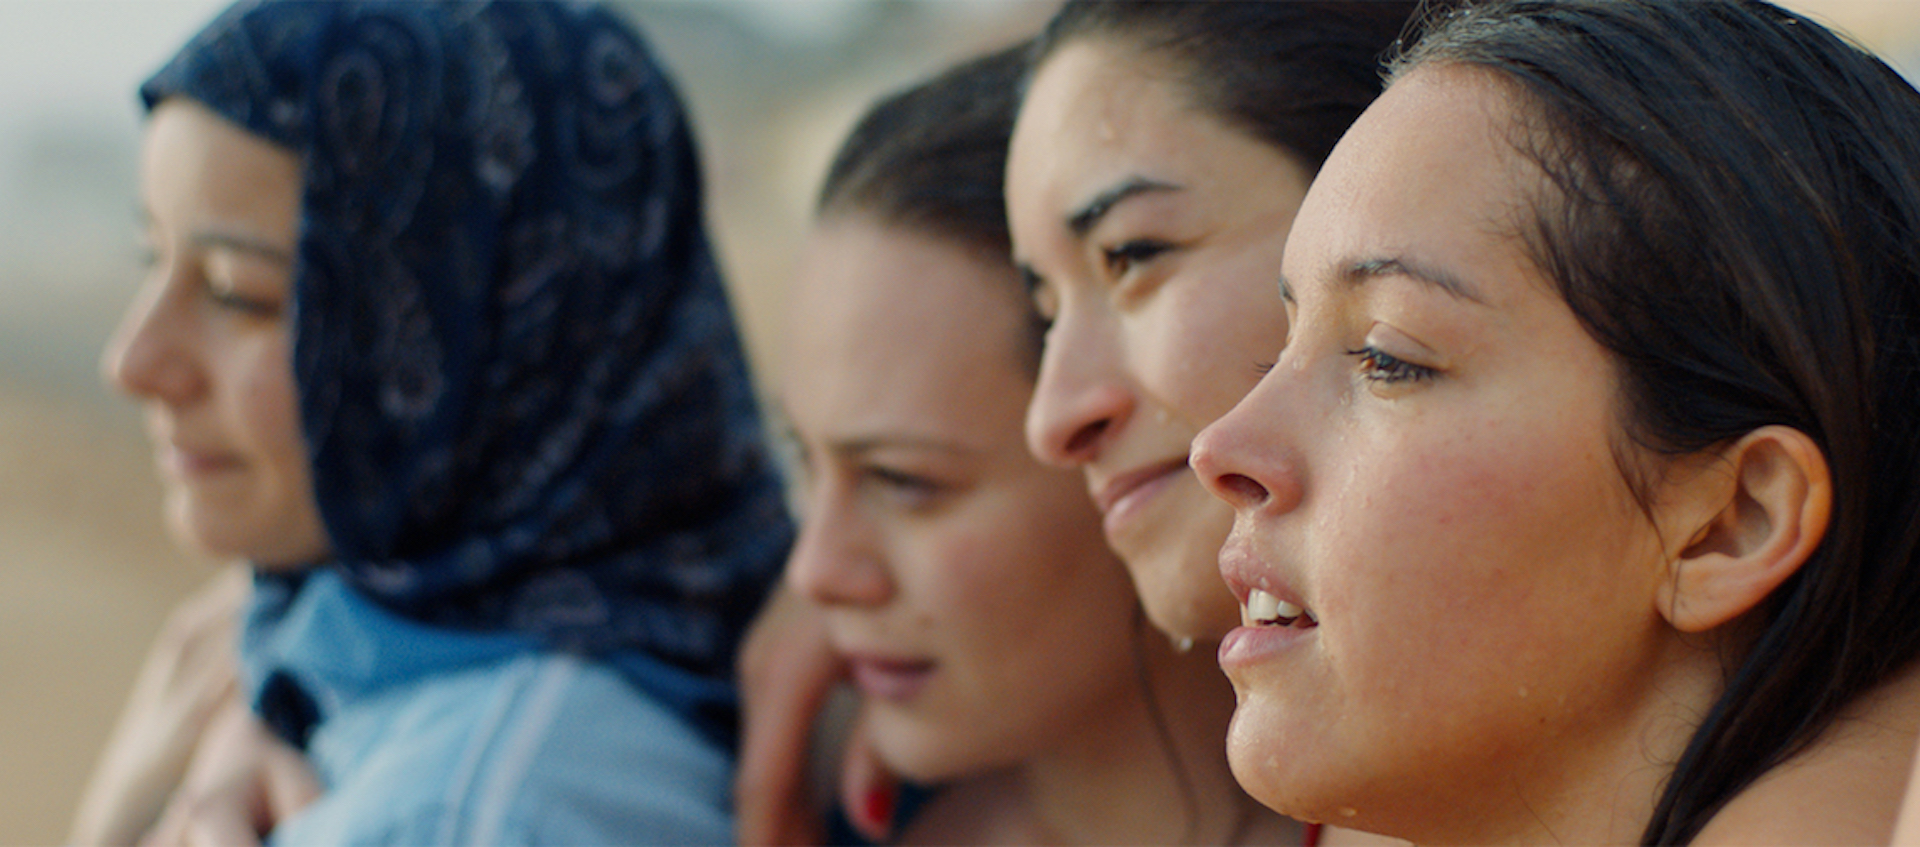 Four young women stand together in a scene from the film Papicha